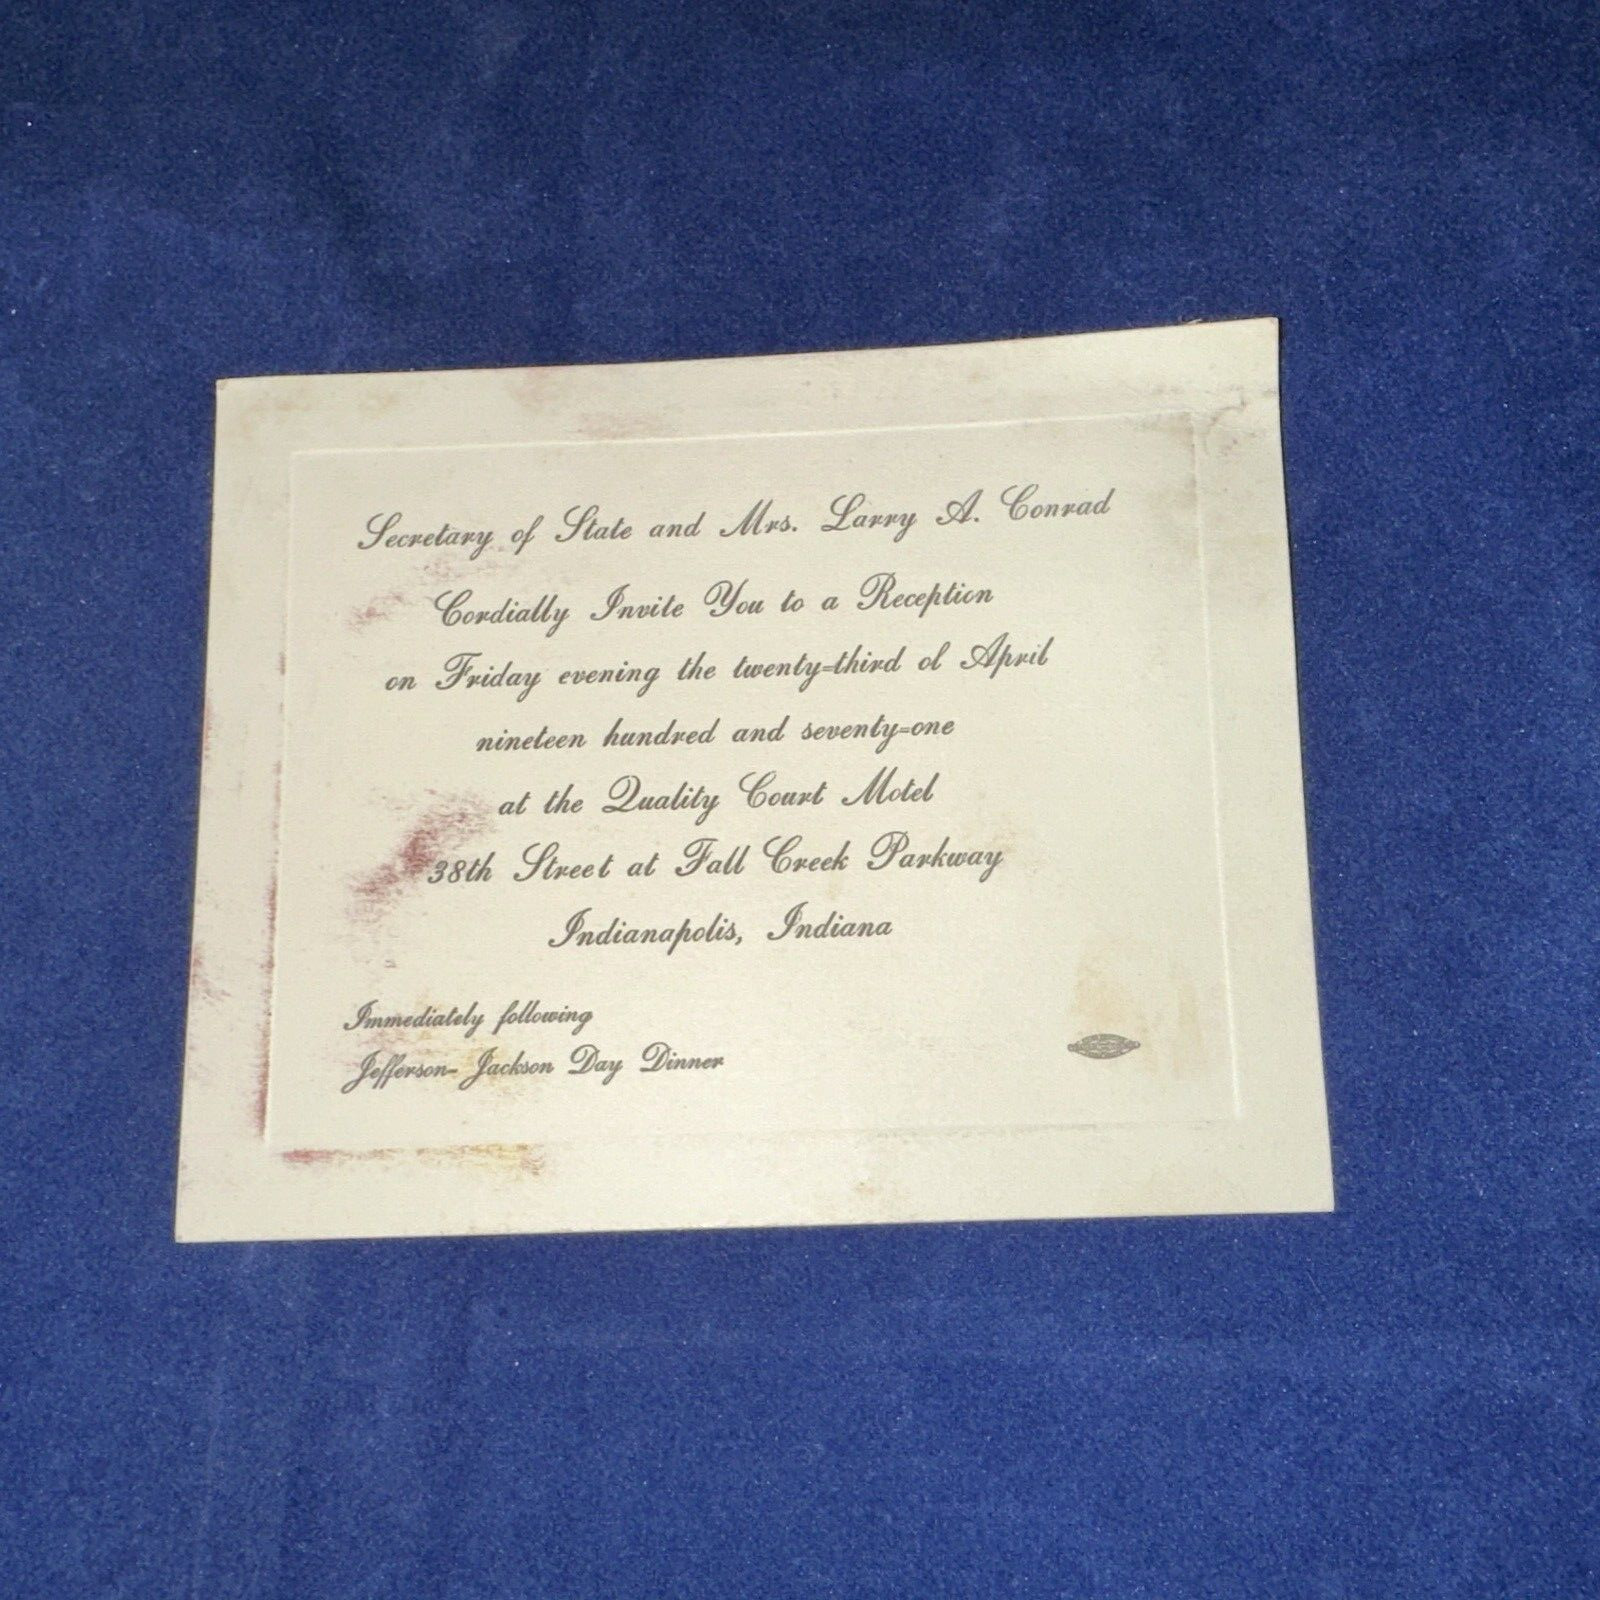 Vintage Invite To Party Hosted By Secretary Of State Larry Conrad And Wife 1971